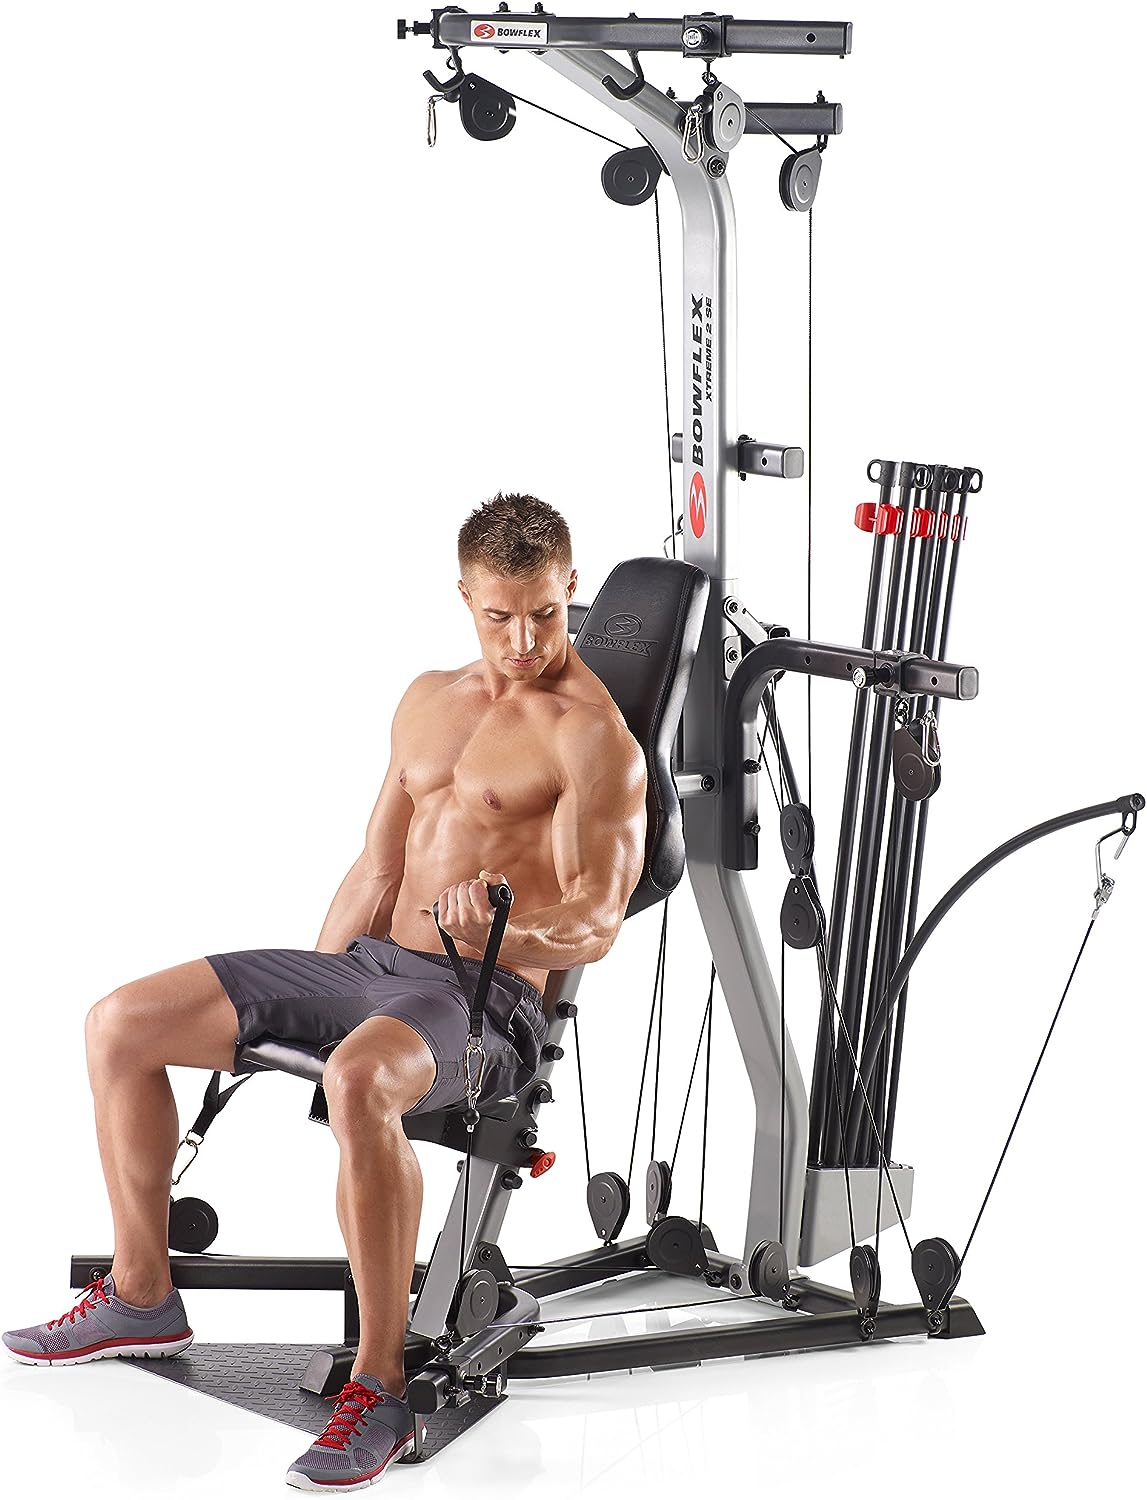 A picture of the Bowflex Xtreme 2 SE, the ultimate Bowflex home gym for maximizing functionality.